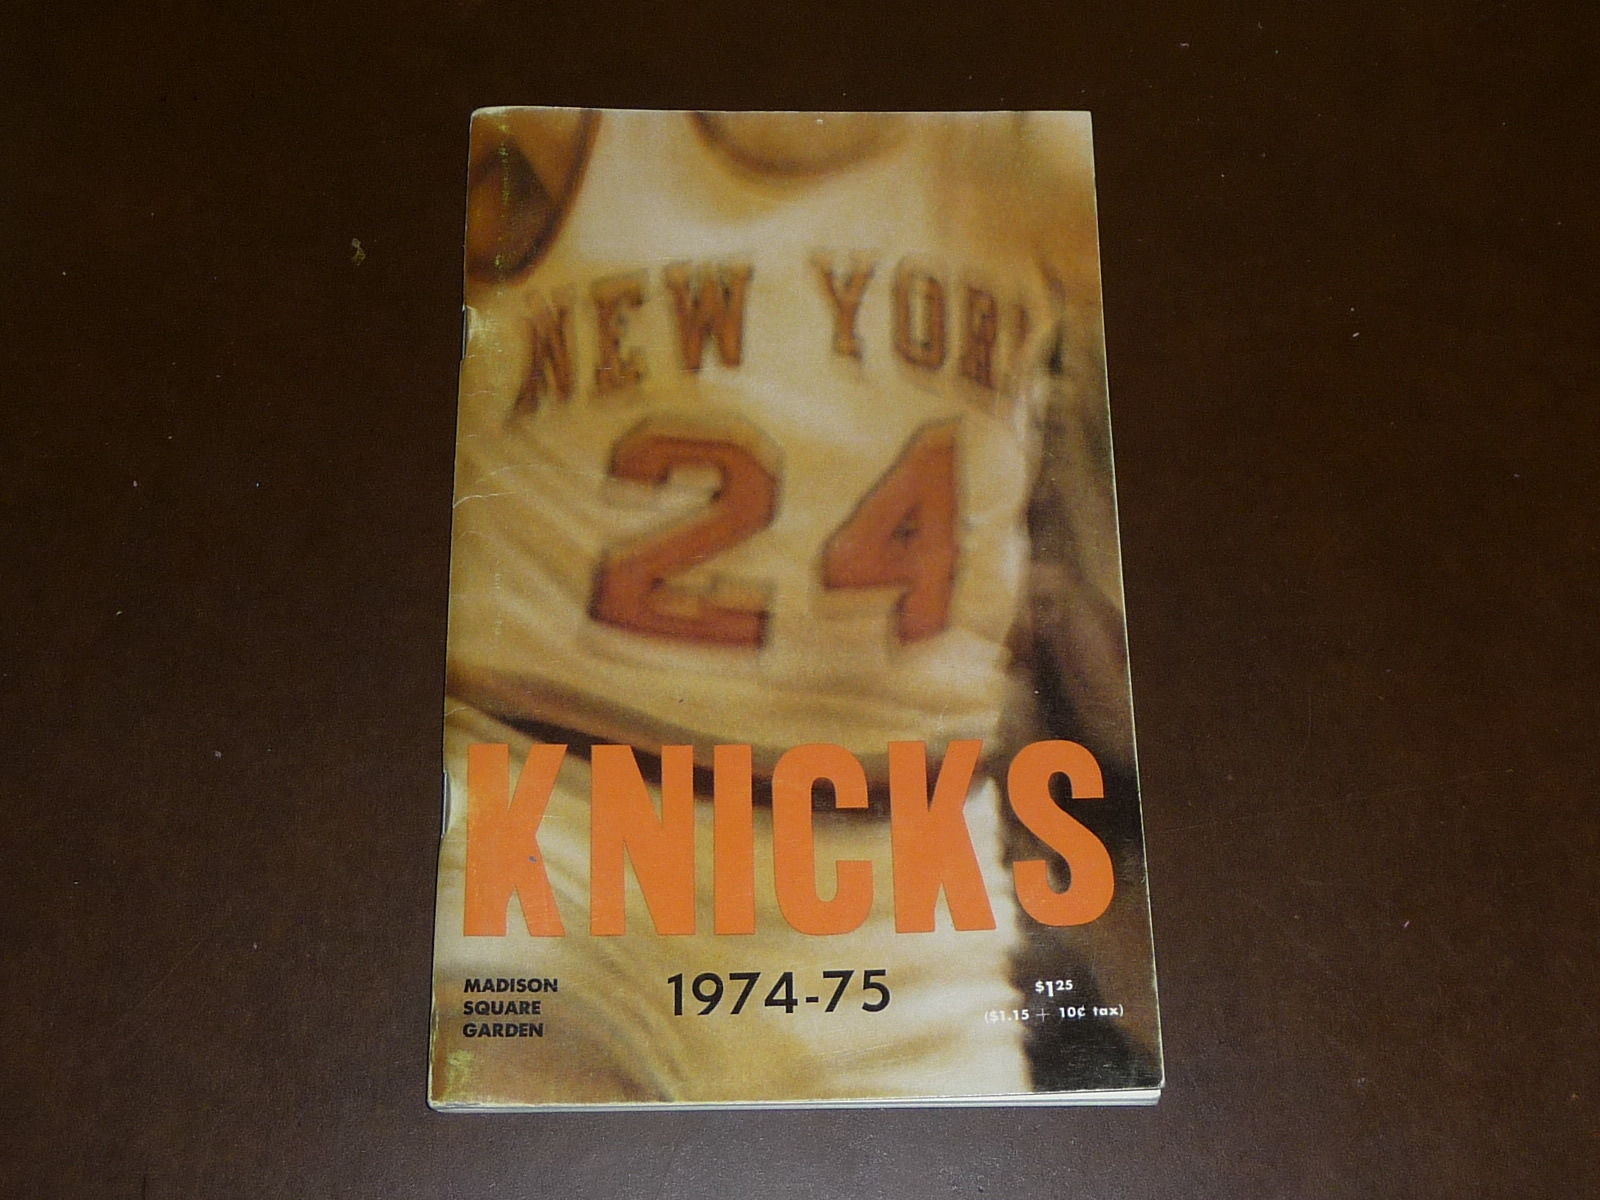 1974 1975 NEW YORK KNICKS NBA BASKETBALL YEARBOOK MEDIA GUIDE  EX-MINT PLUS